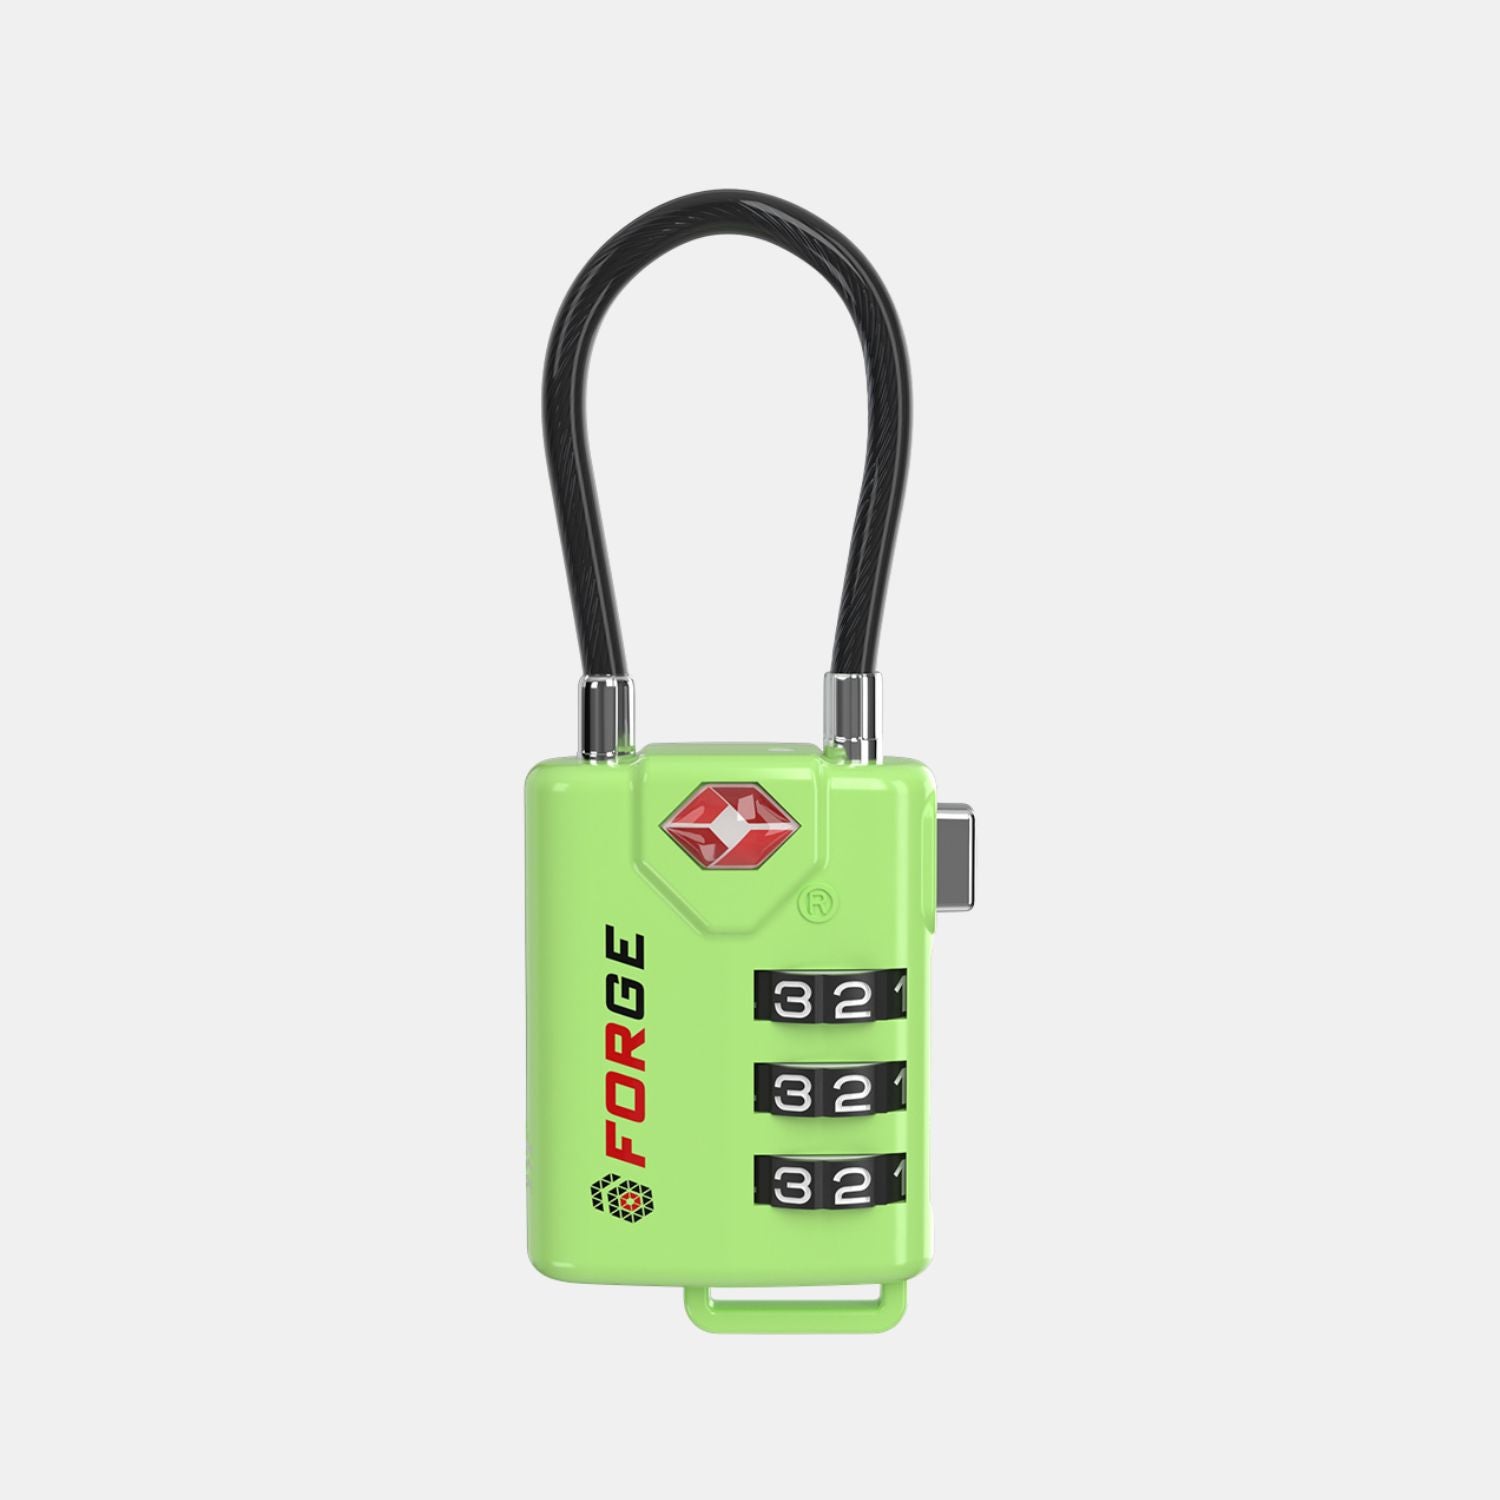 TSA Approved Cable Luggage Lock with Easy-to-Read Dials, Green 2 Locks